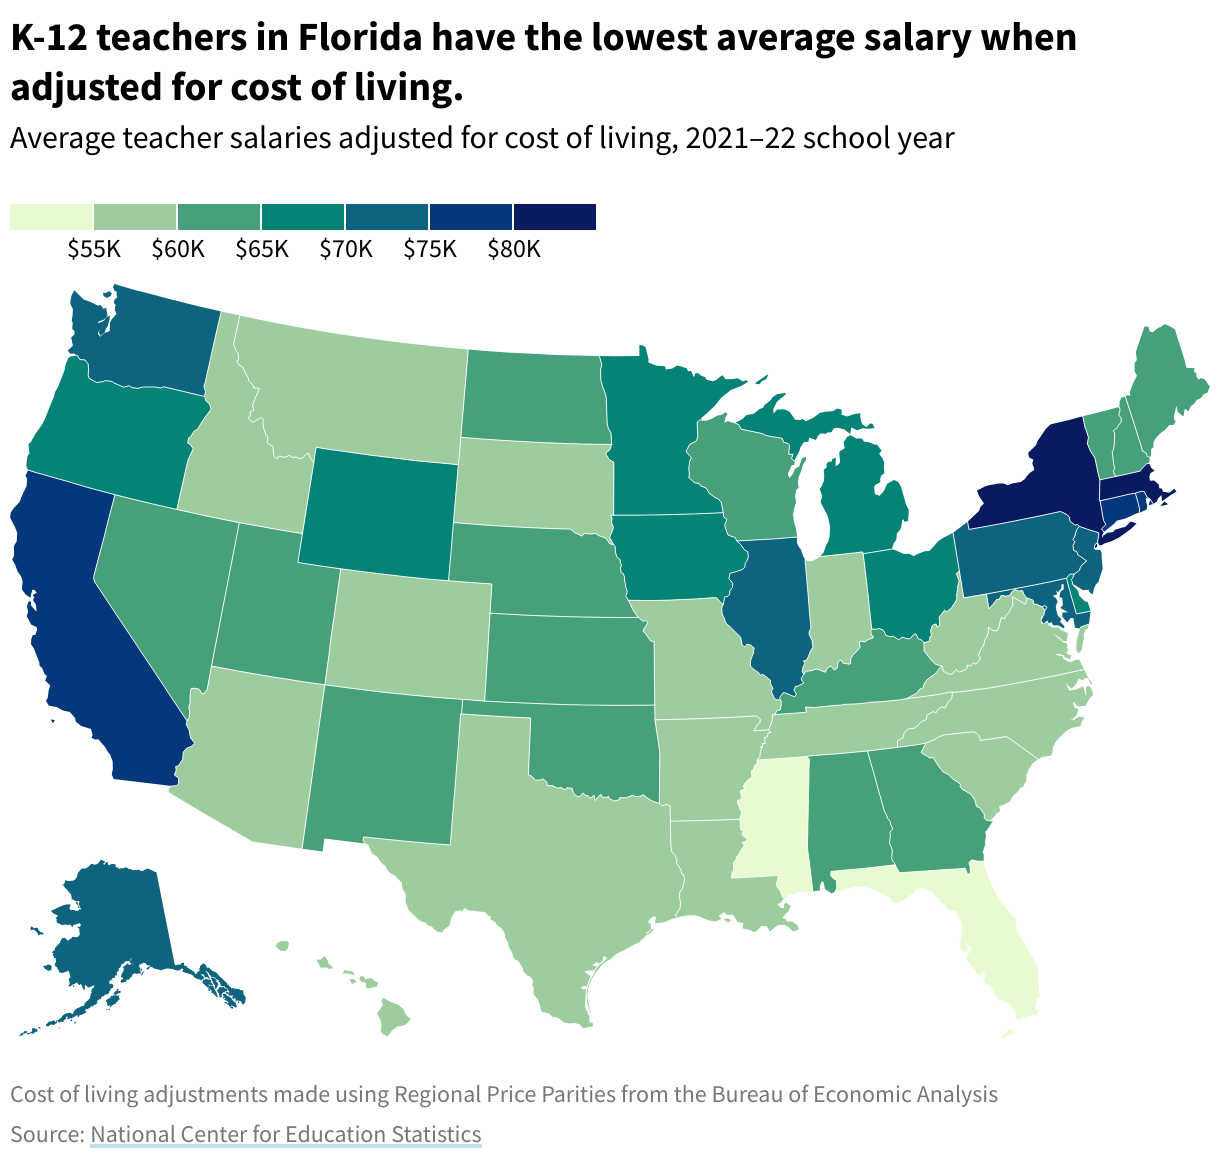 A heat map shows average teacher salaries, adjusted for cost of living, by state, where darker blue indicates higher salaries, and lighter green indicates lower salaries. Florida has the lowest K-12 average teacher salary when adjusted for cost of living.